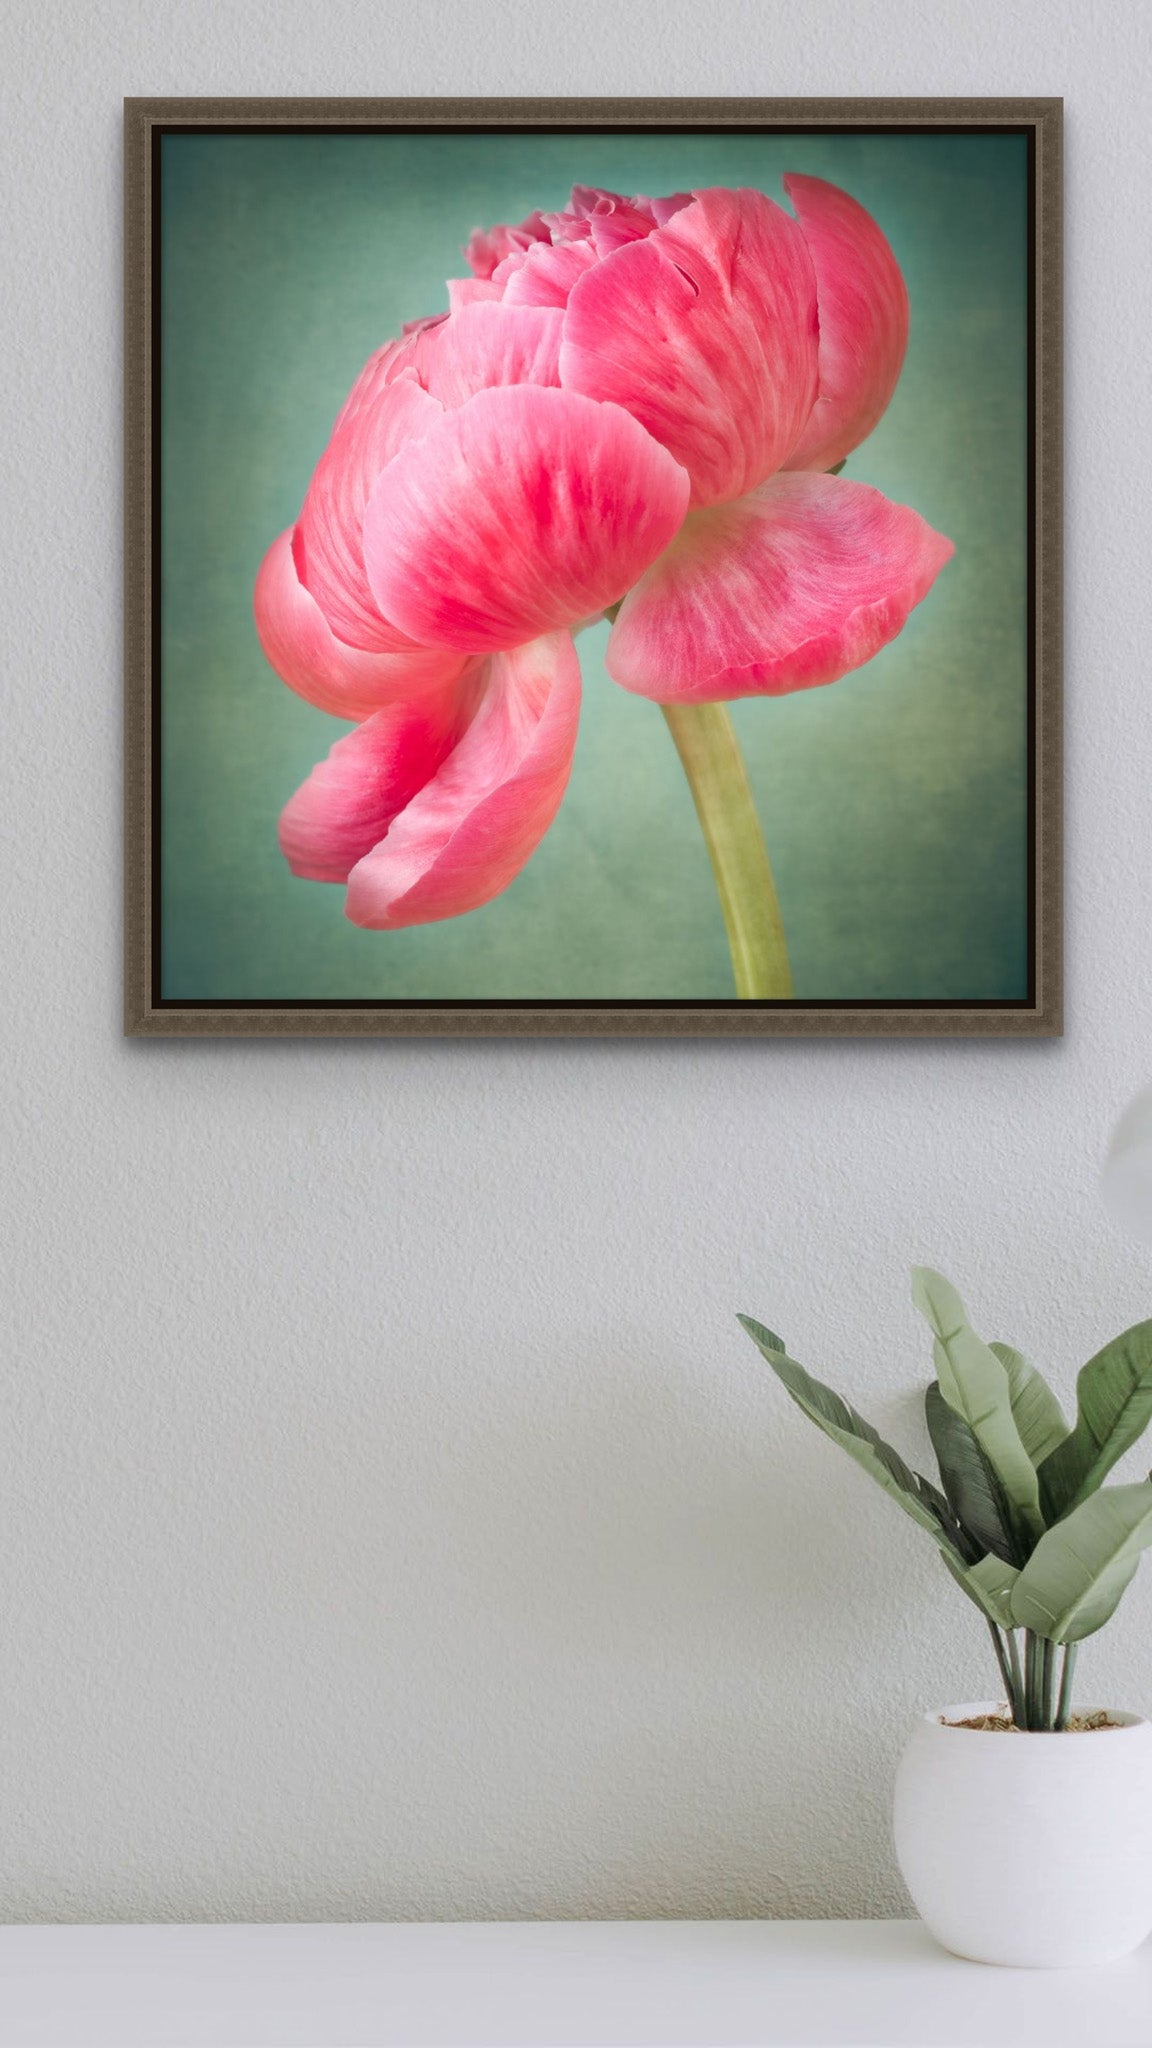 Picture hanging on a wall. Under the picture, there is a countertop with a plant. The picture is a metal print photograph of a pink peony flower on a greenish background by photographer Cameron Dreaux. 